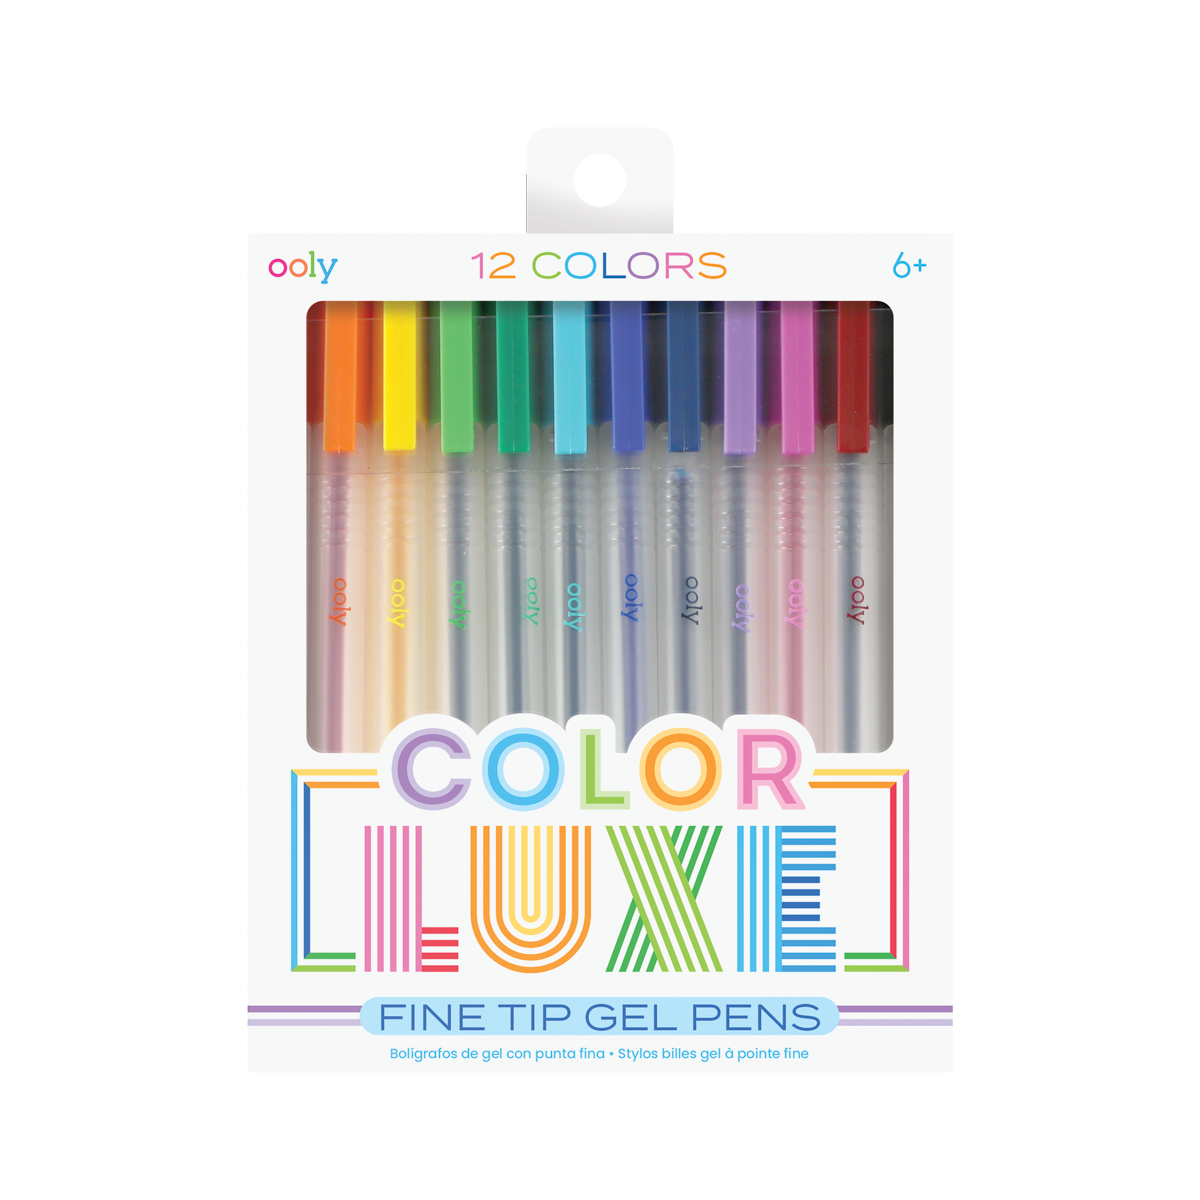 Set of 12 Color Luxe colored gel pens with fine tips in new packaging